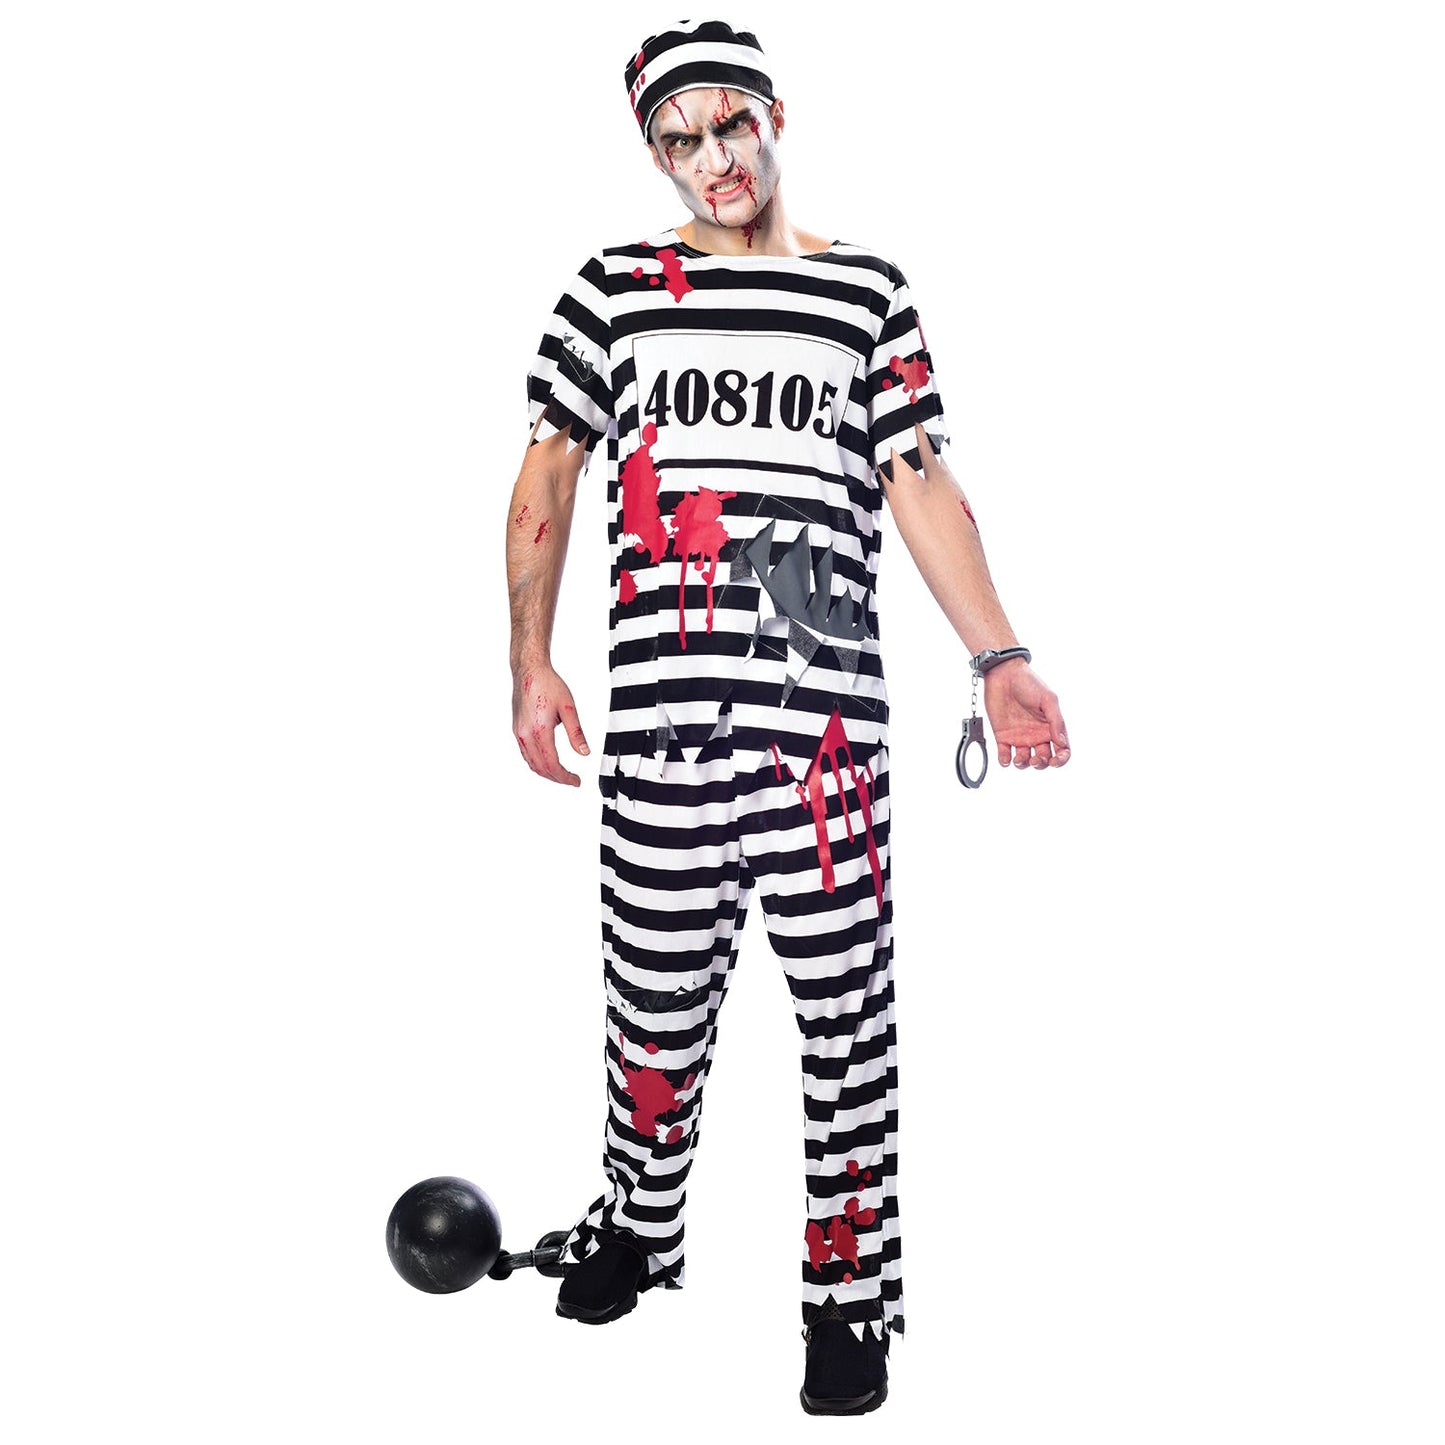 Mens Halloween Zombie Convict Costume includes top, trousers and hat